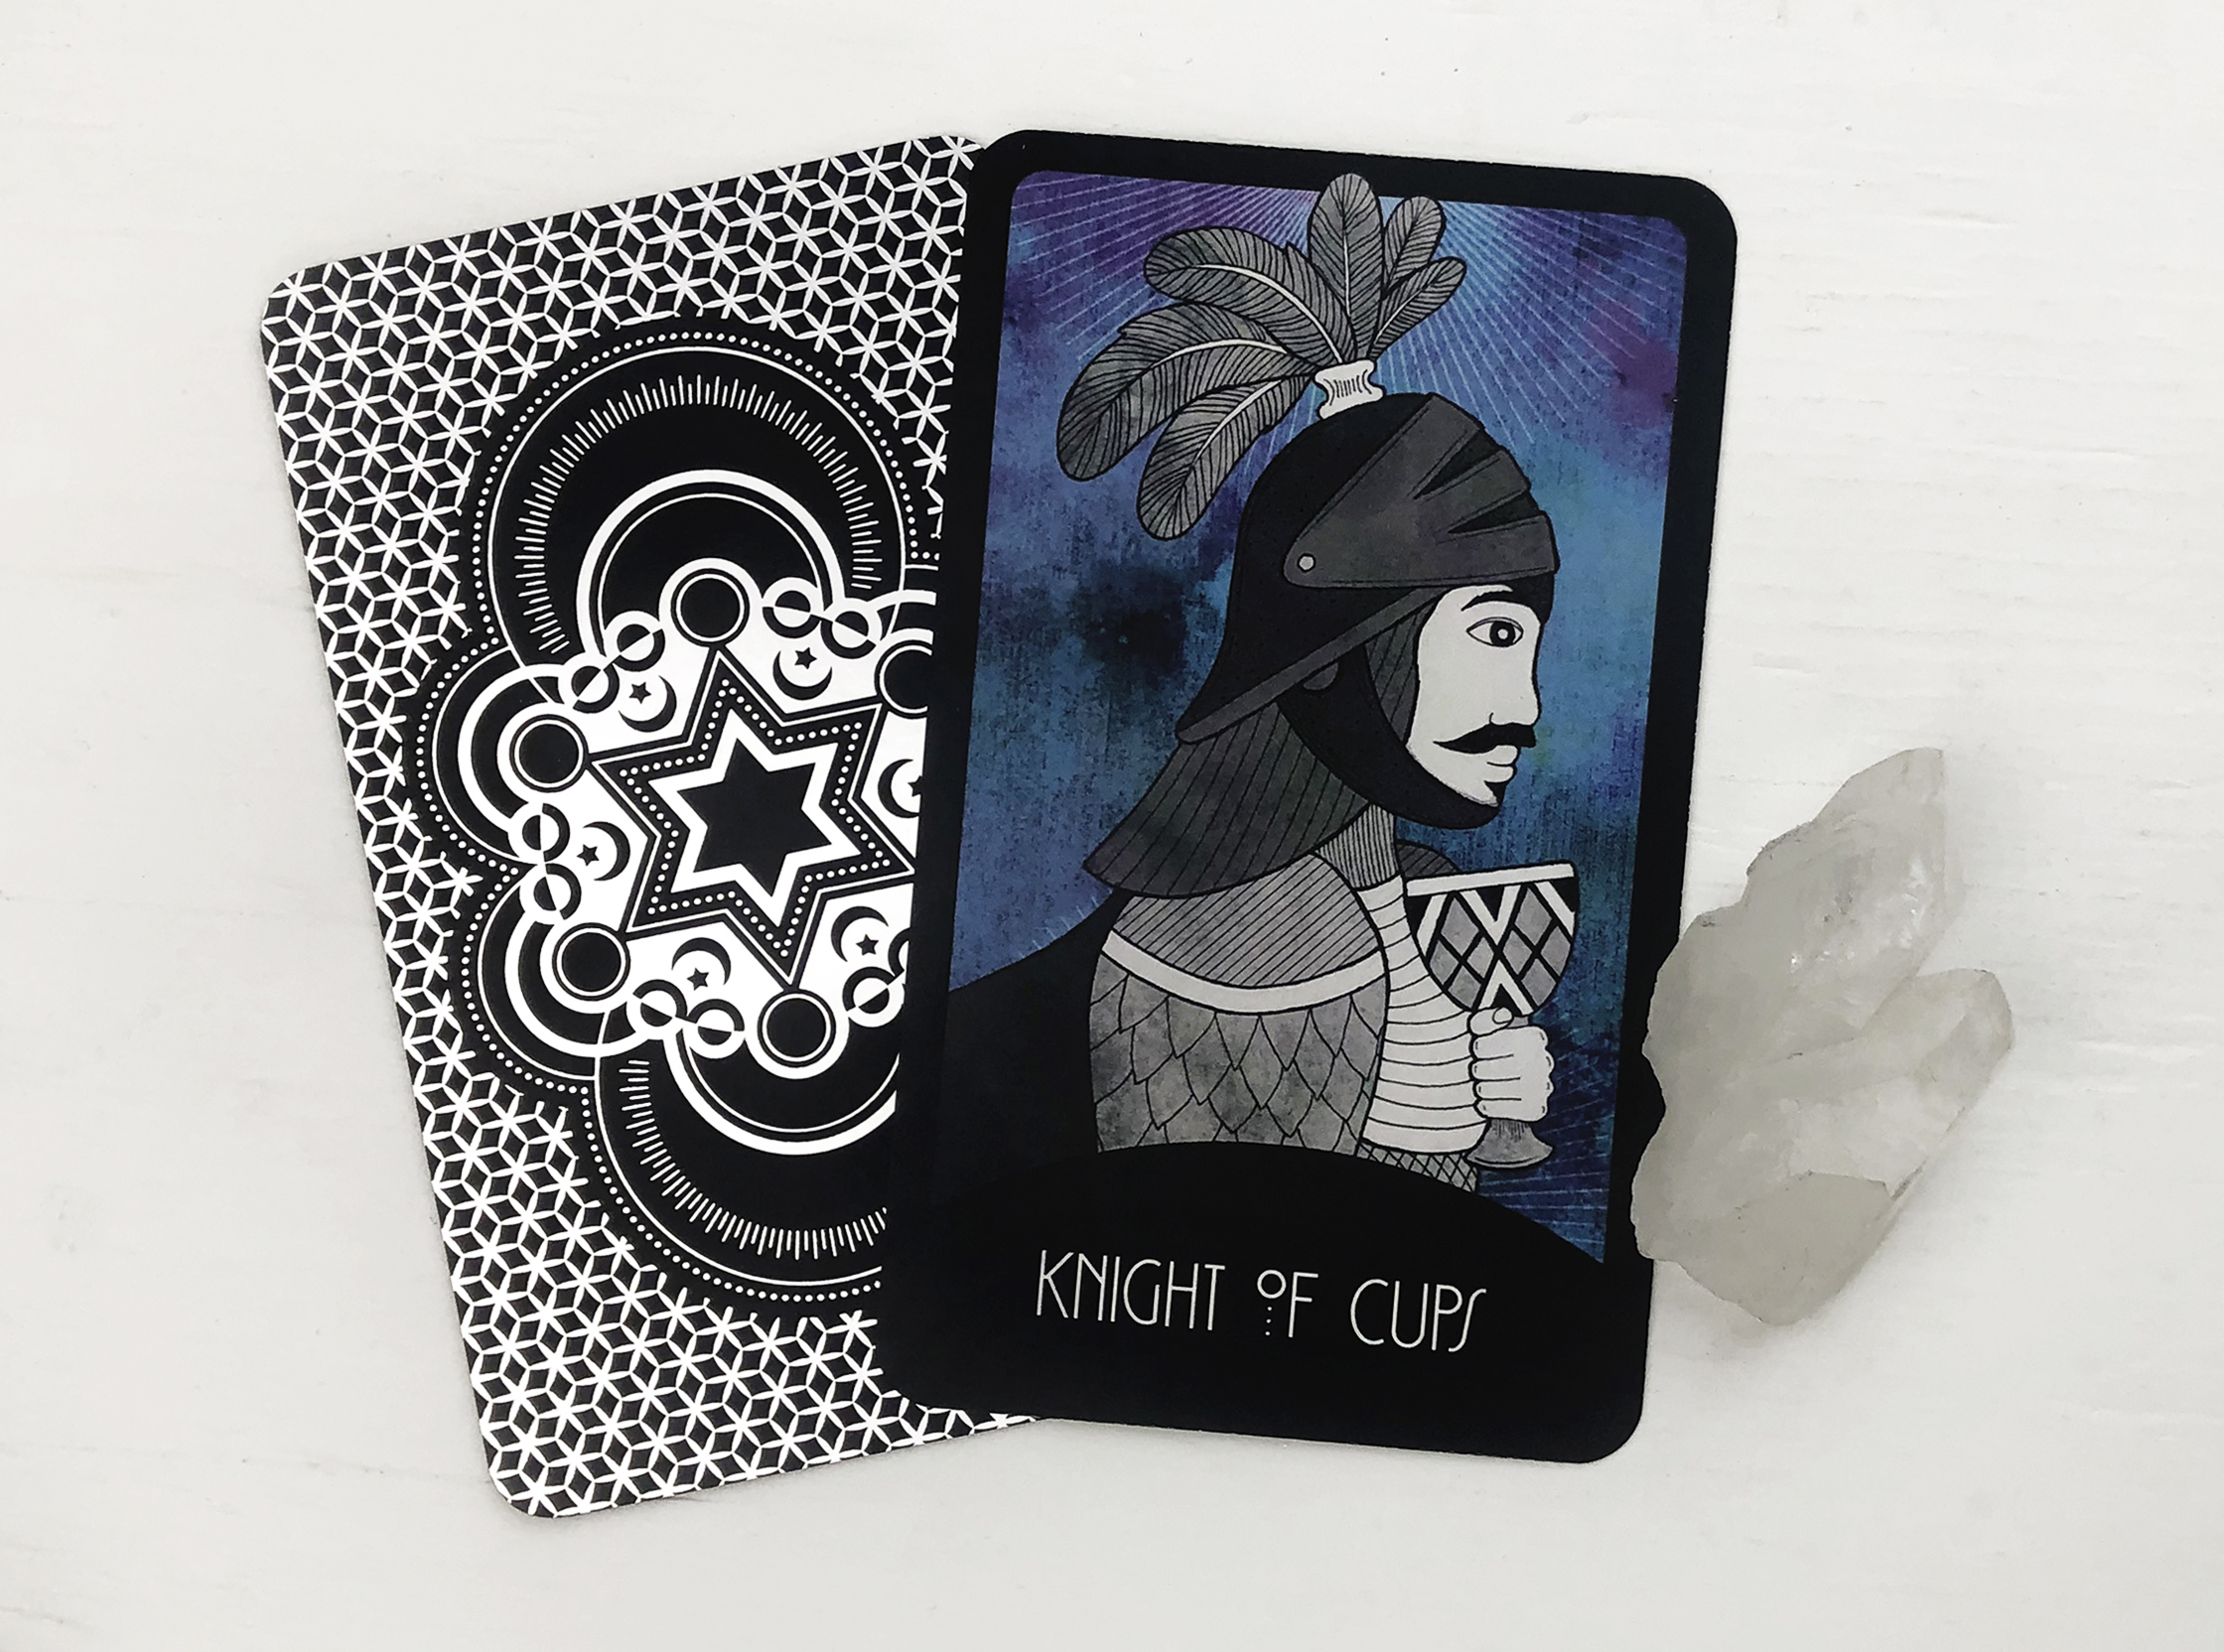 Knight of Cups Tarot Card Meaning